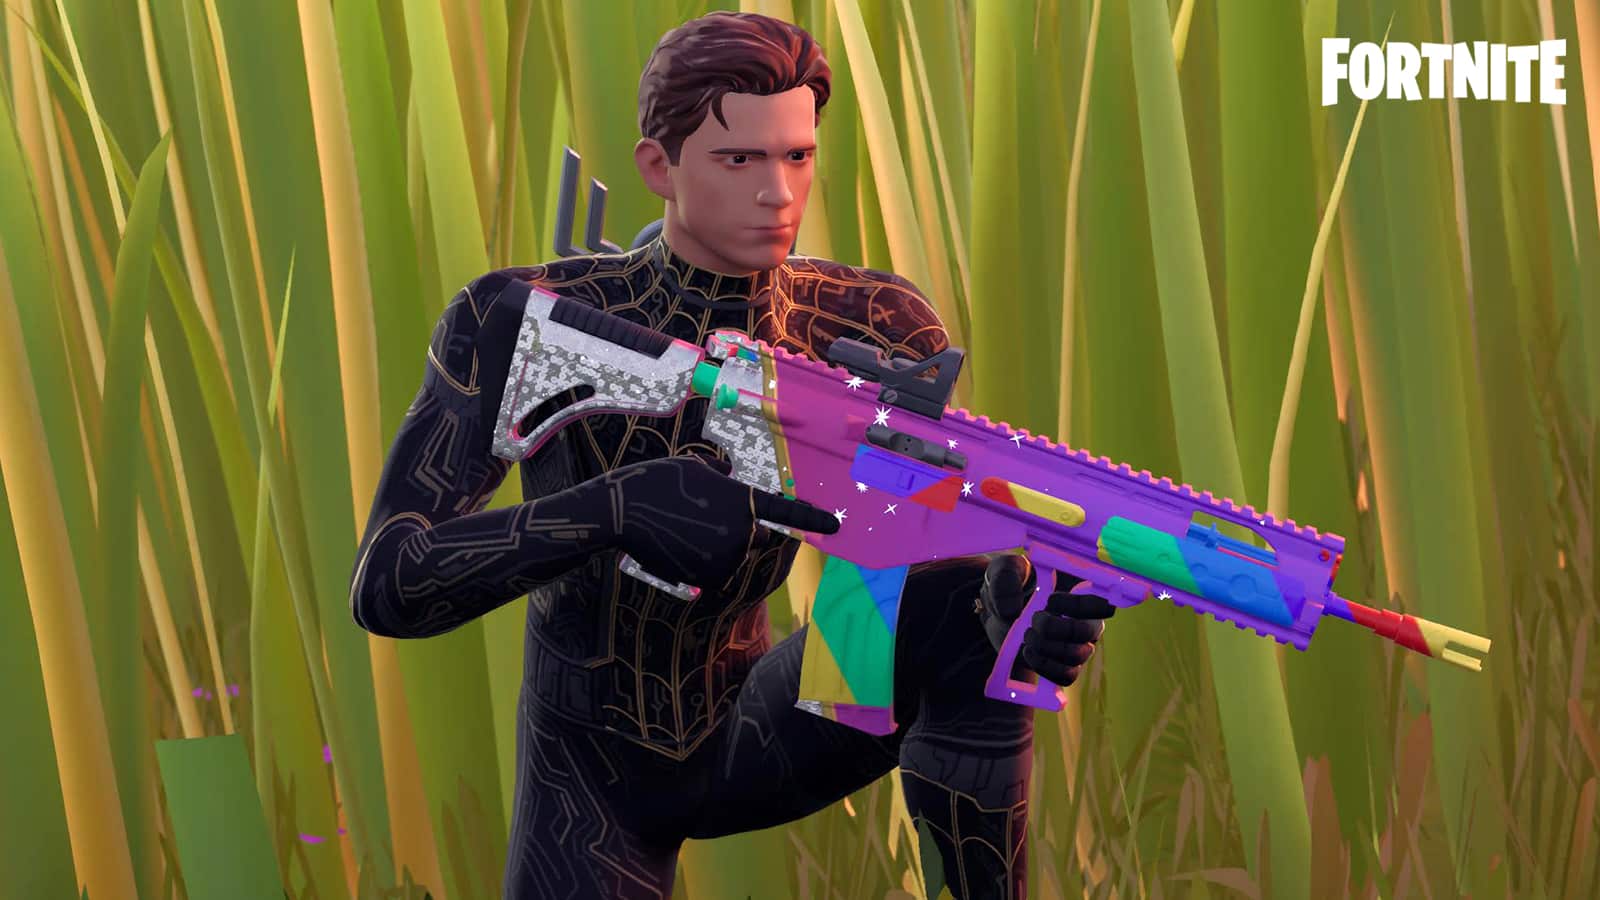 Spider-Man hiding in Tall Grass in Fortnite